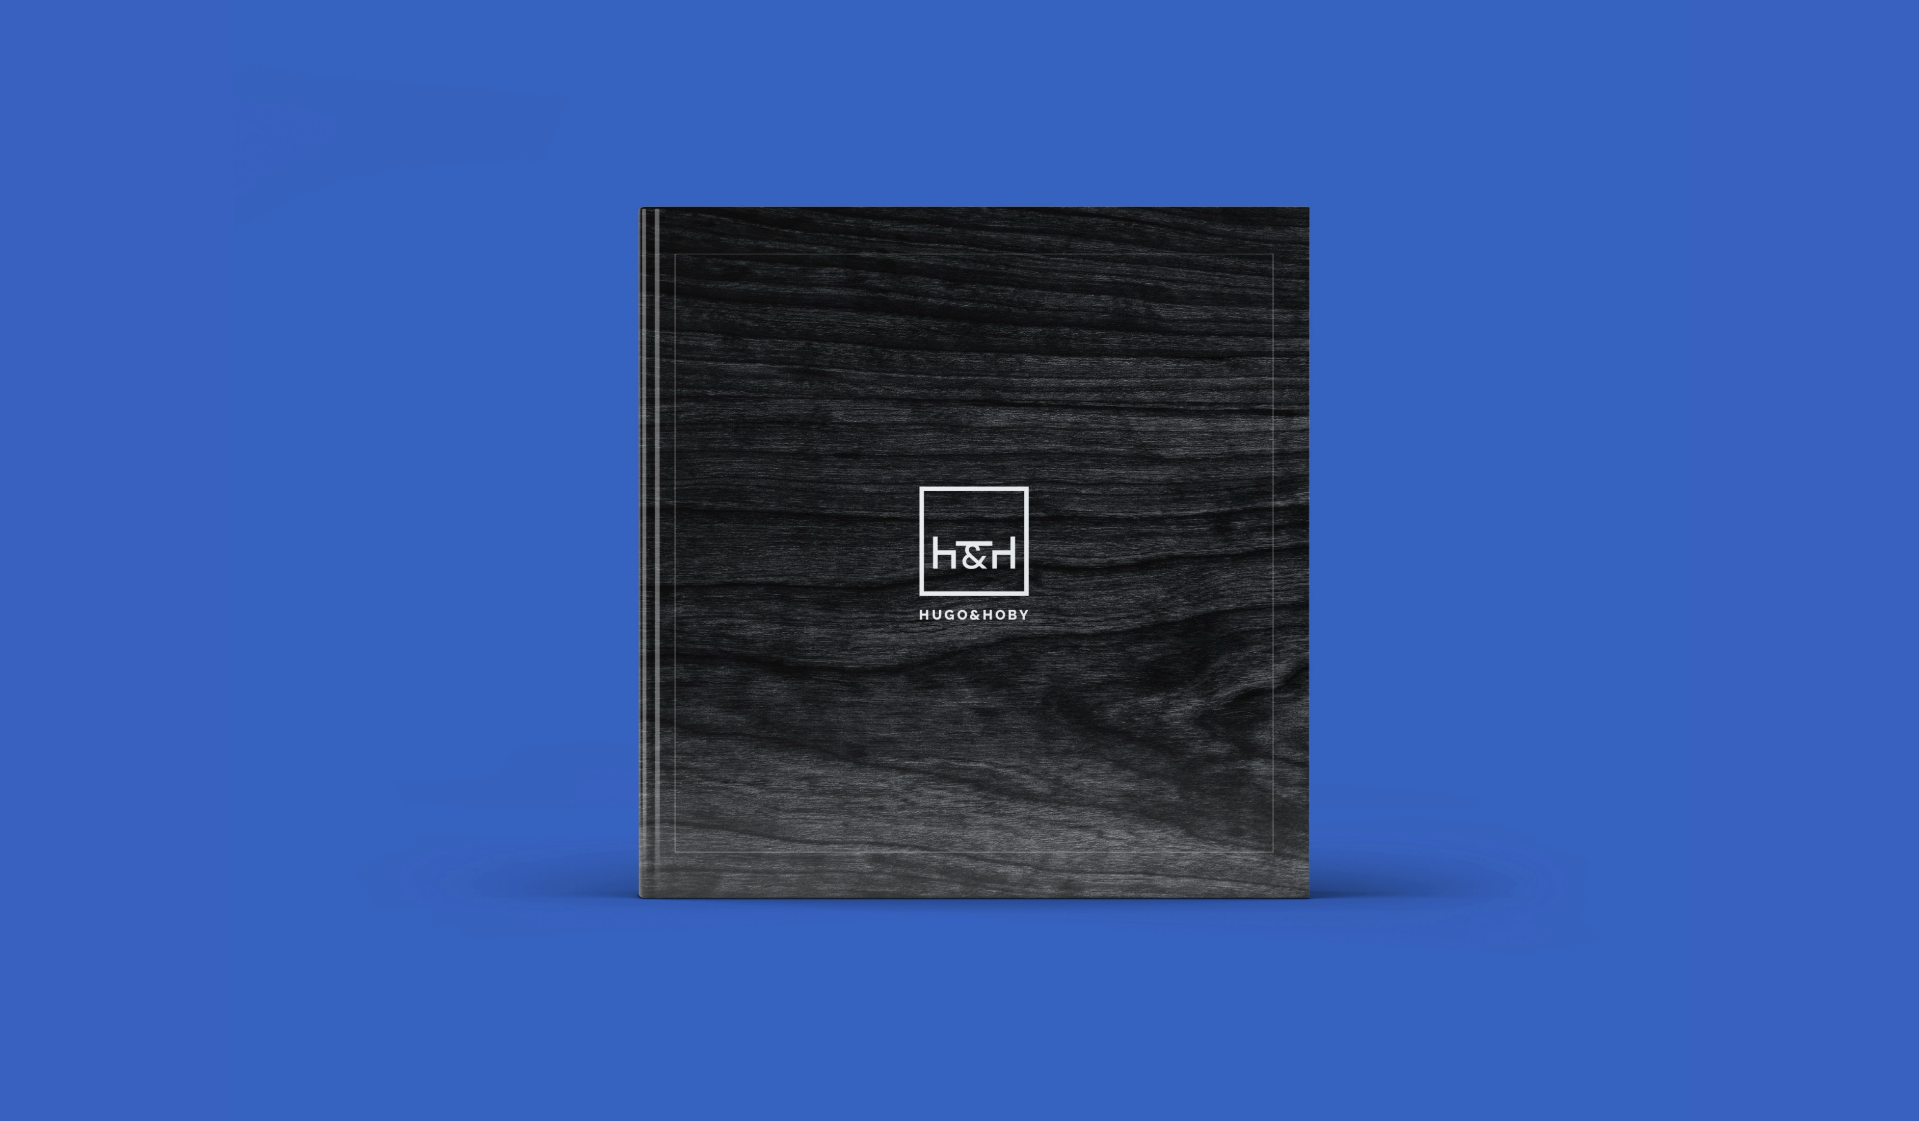 A sleek black journal with an embossed Hugo & Hoby geometric logo centered on a textured cover, against a vibrant blue background.